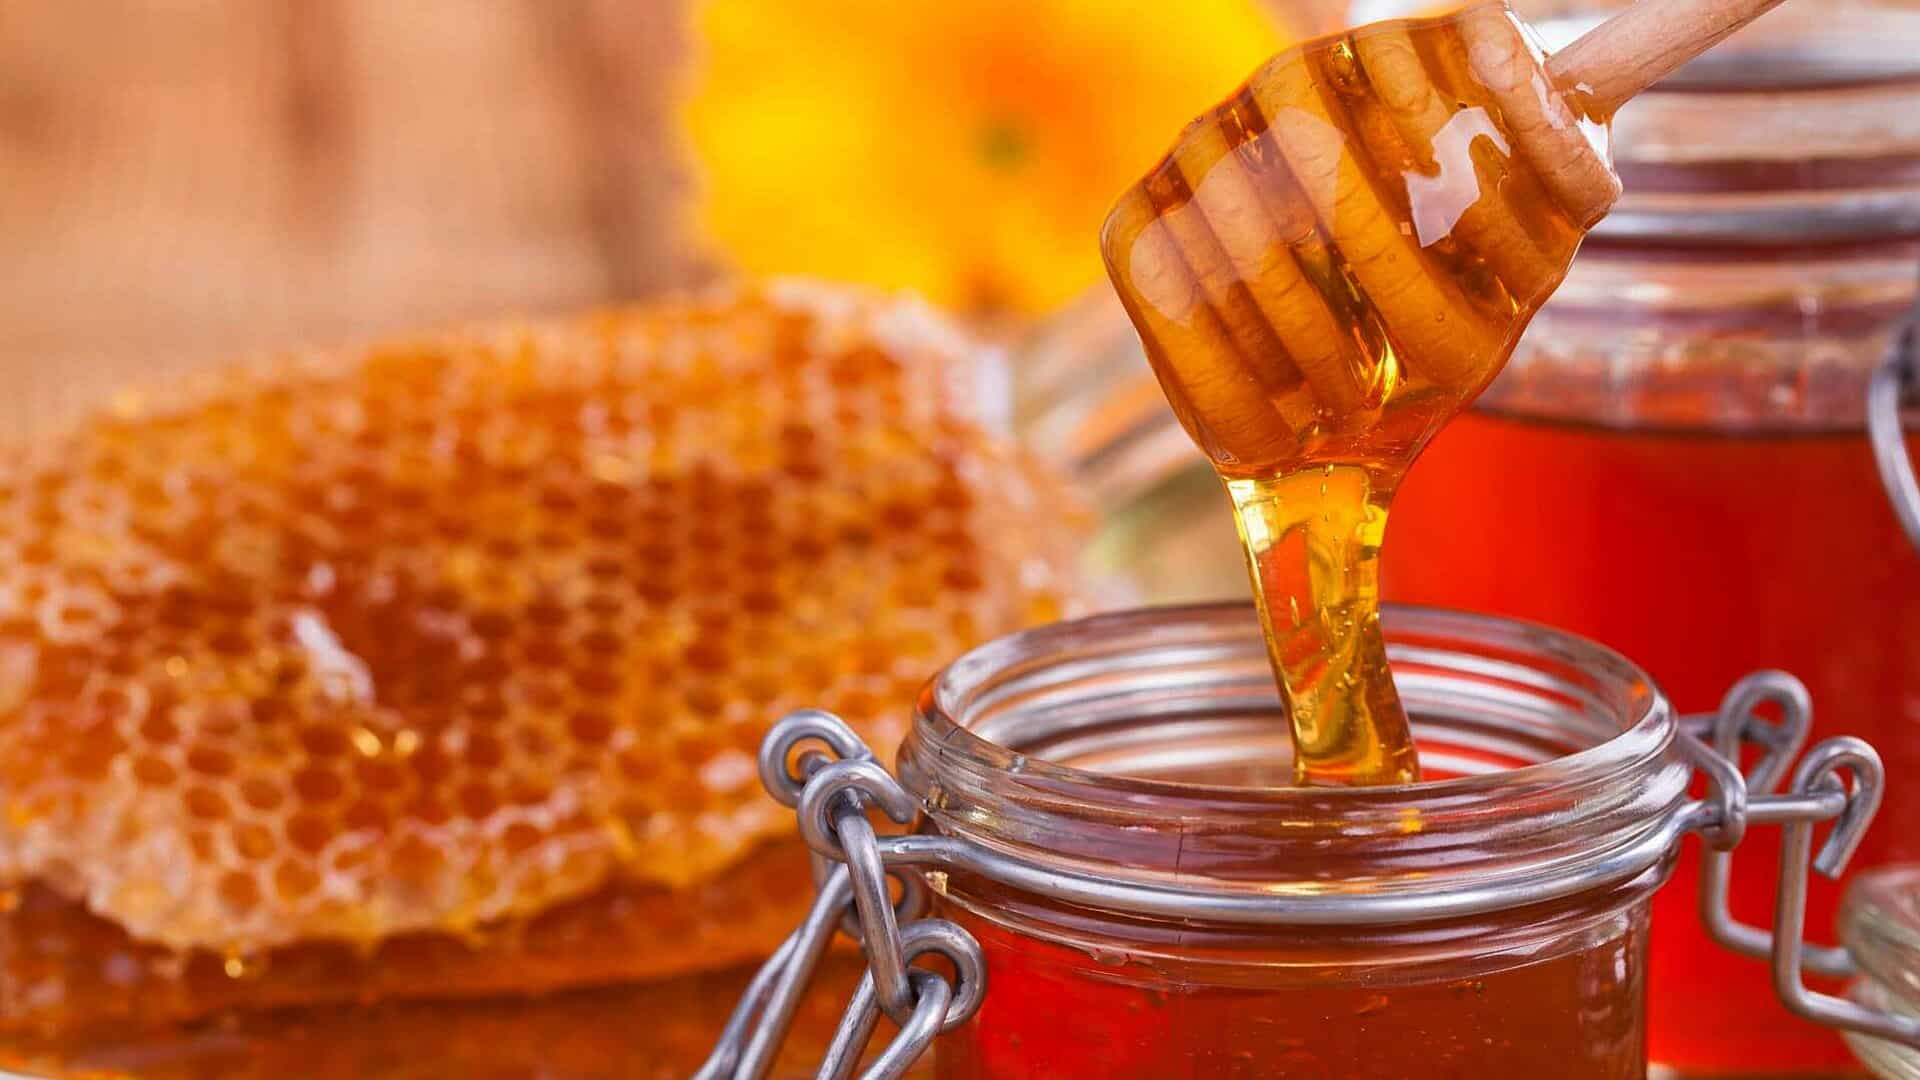 Honey adulteration: CCPA asks FSSAI to take appropriate action